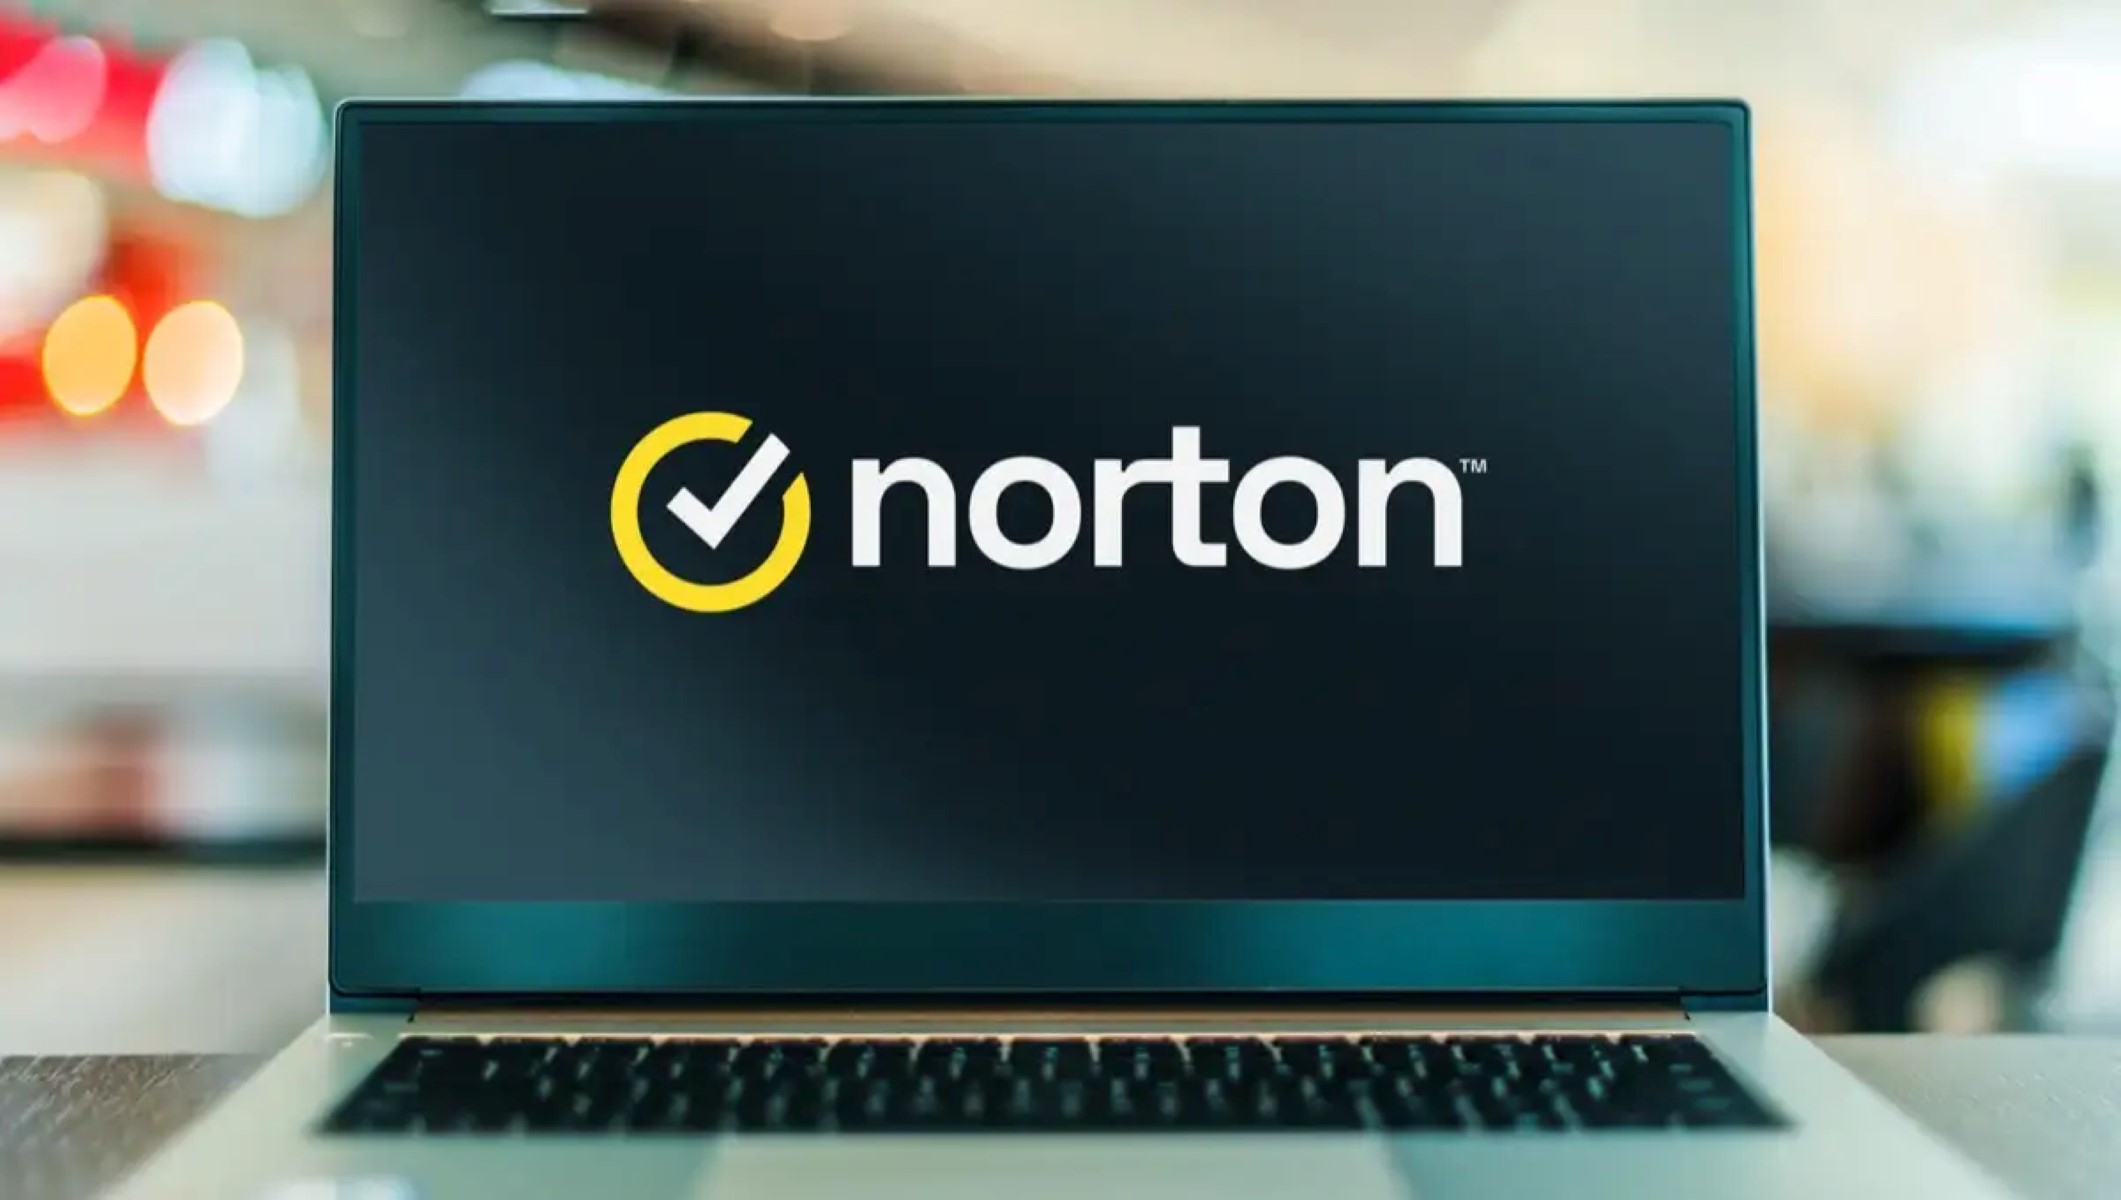 How To Turn Off Norton Firewall